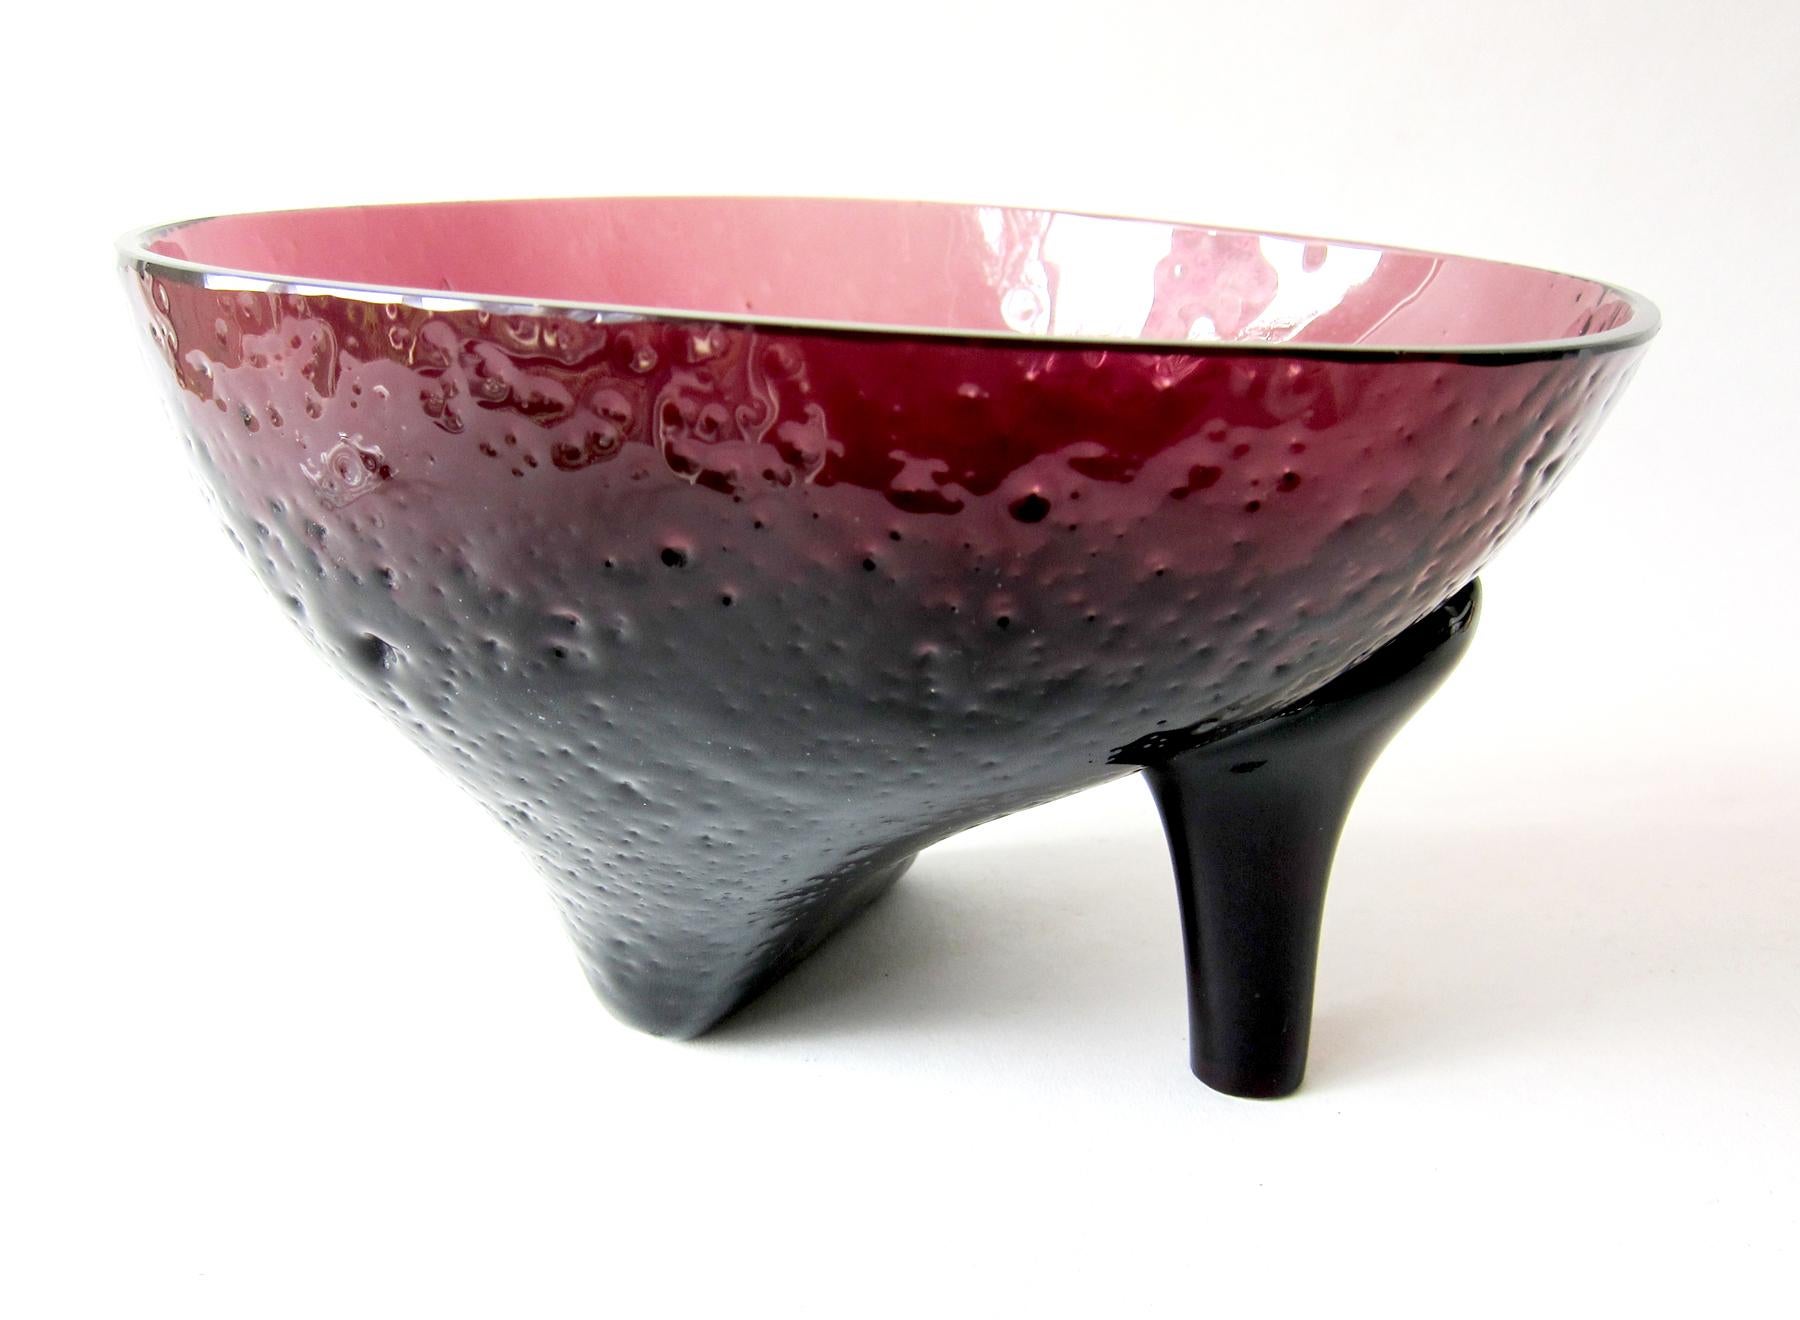 Rare, amethyst glass high heel bowl or vase created by Wayne Husted for Blenko. Bowl measures 5.5